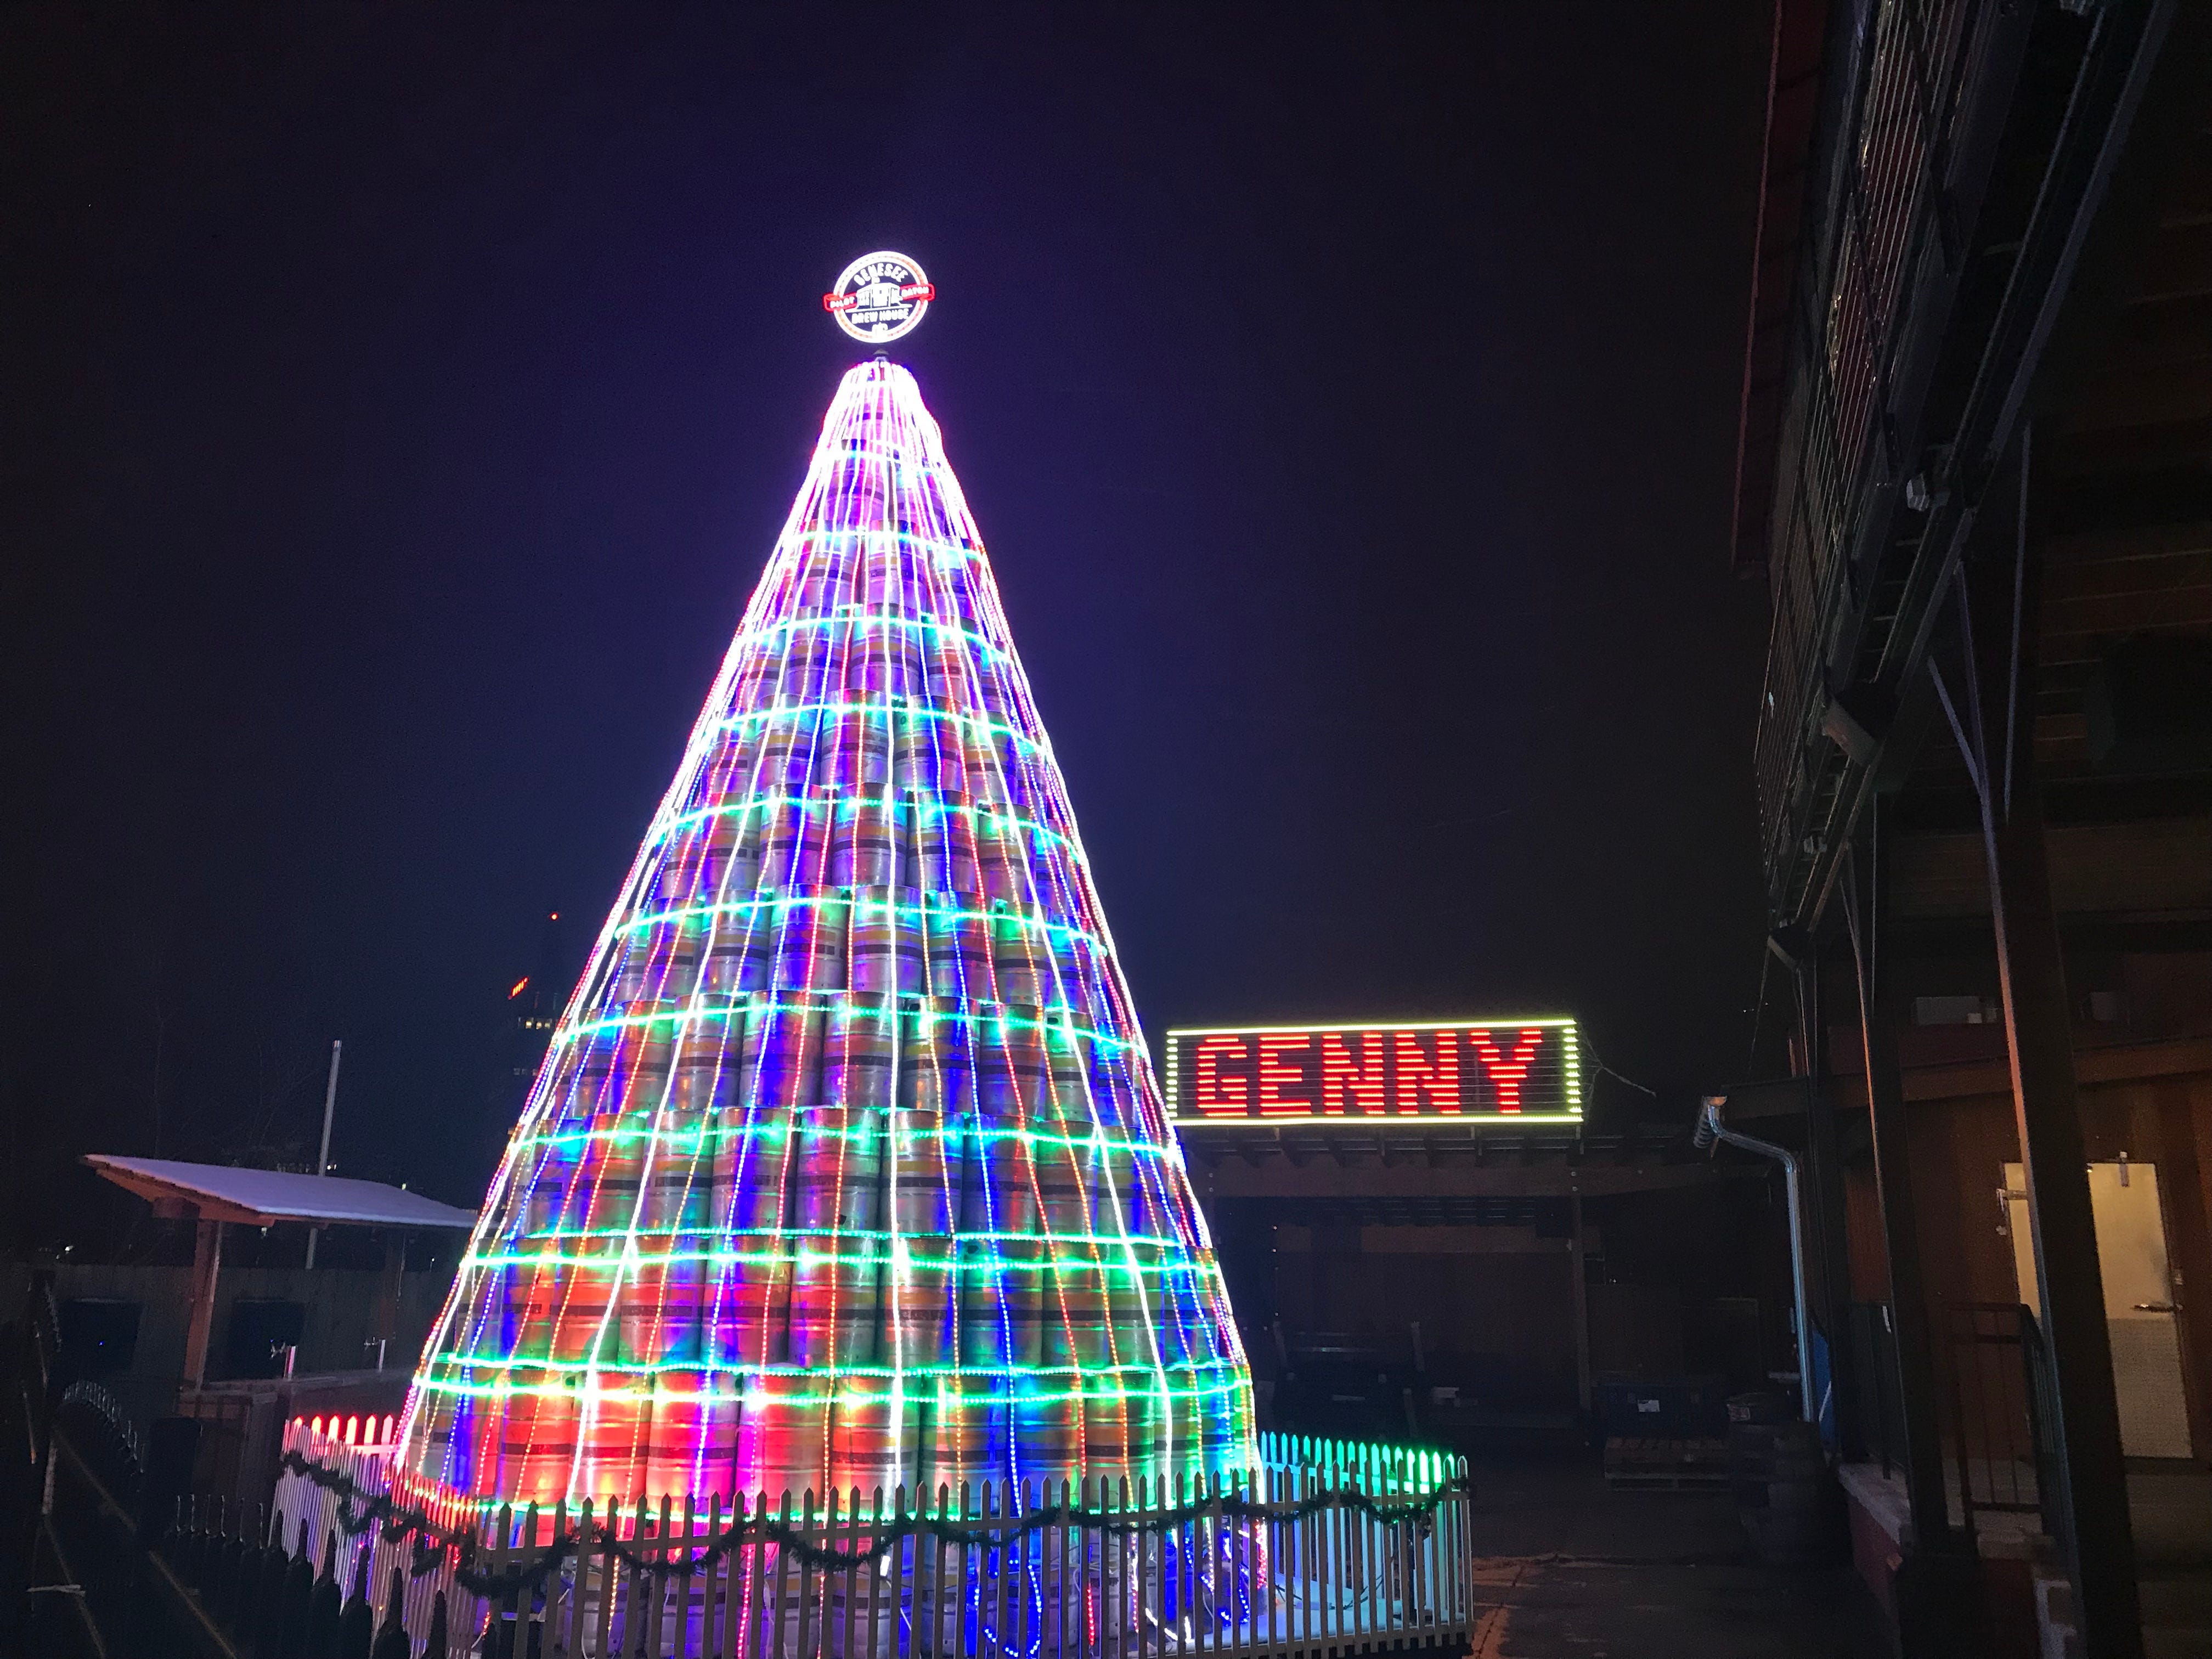 Get ready for the countdown: Genesee Brewery sets keg-tree lighting for Dec. 6